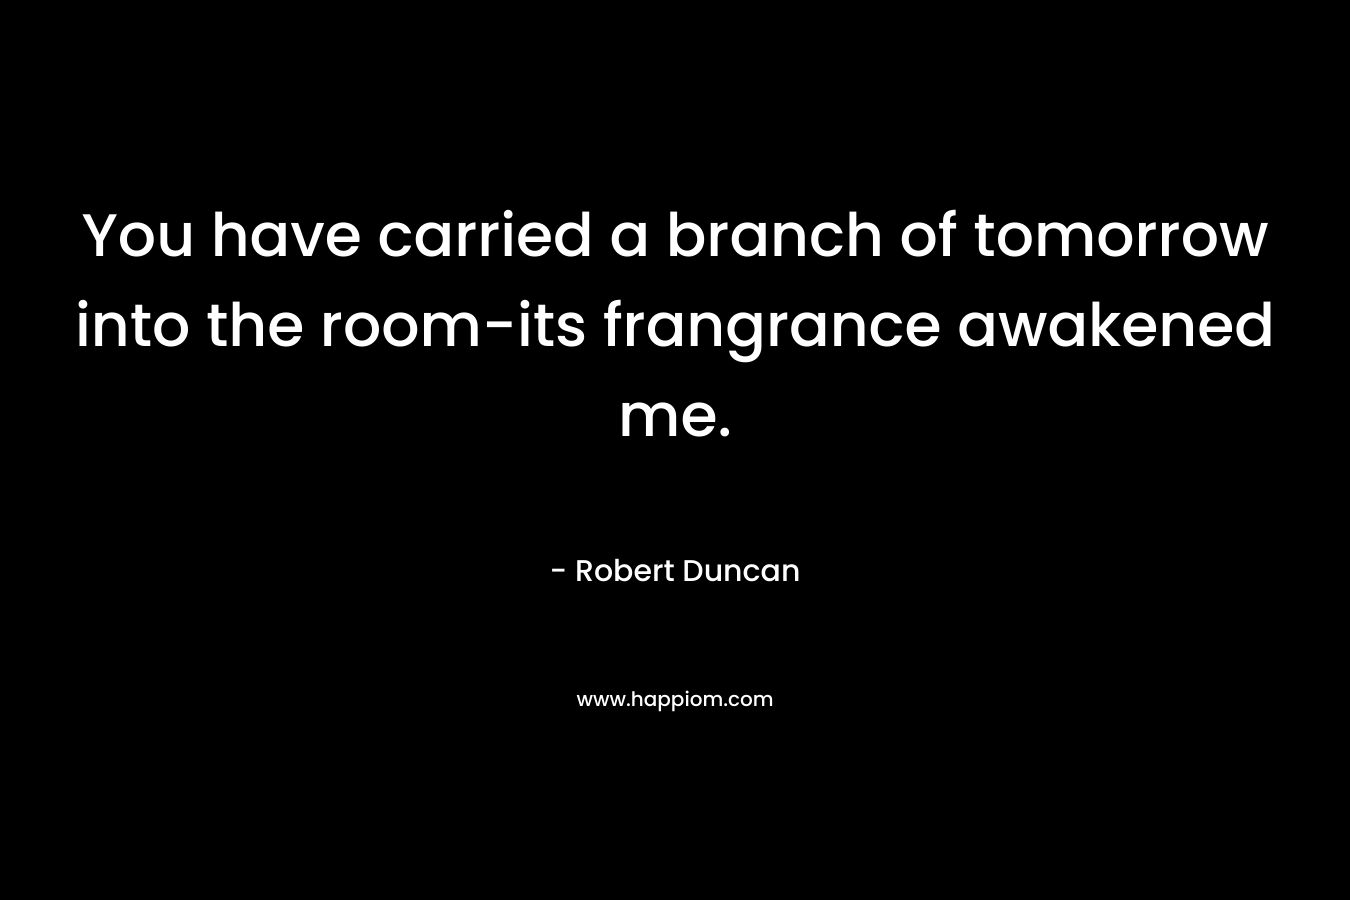 You have carried a branch of tomorrow into the room-its frangrance awakened me. – Robert Duncan